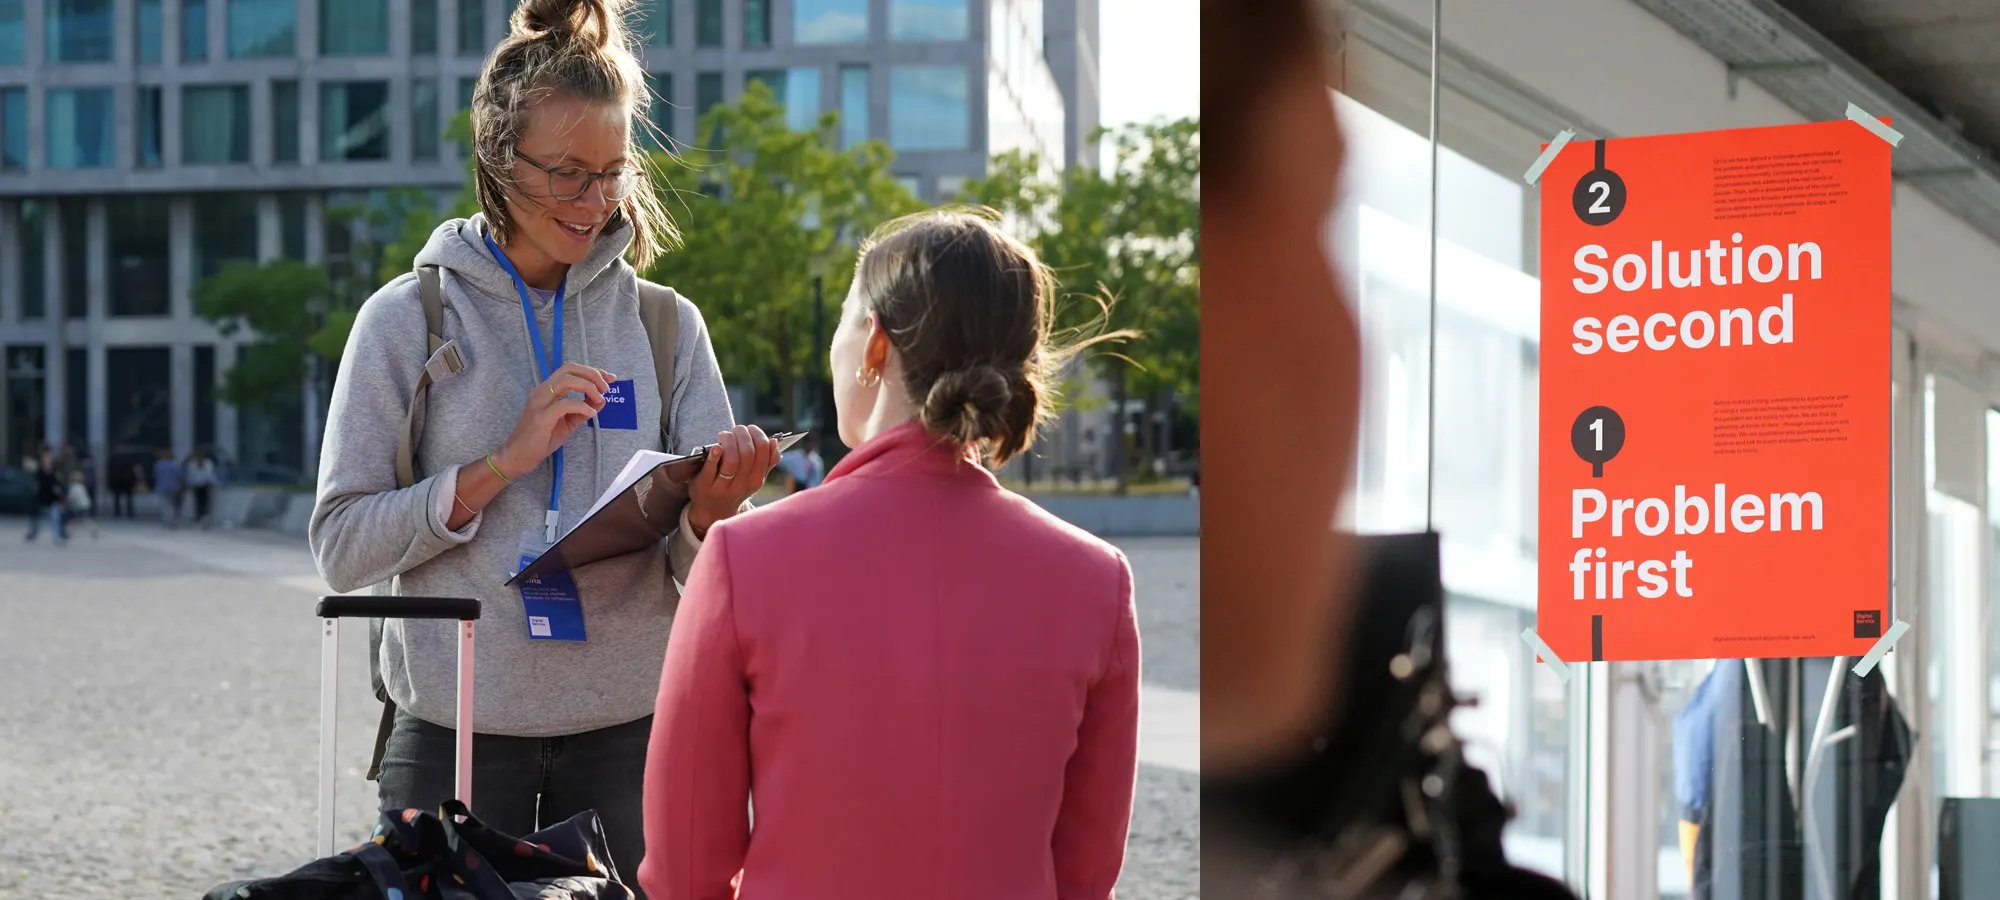 A collage of 2 pictures: 1 white woman interviewing another woman in a public square holding a clipboard and wearing a branded hoodie with a blue logo of the Digital Service; a bright orange poster saying ‘Solution second’, ‘Problem first’ in the style of a underground map